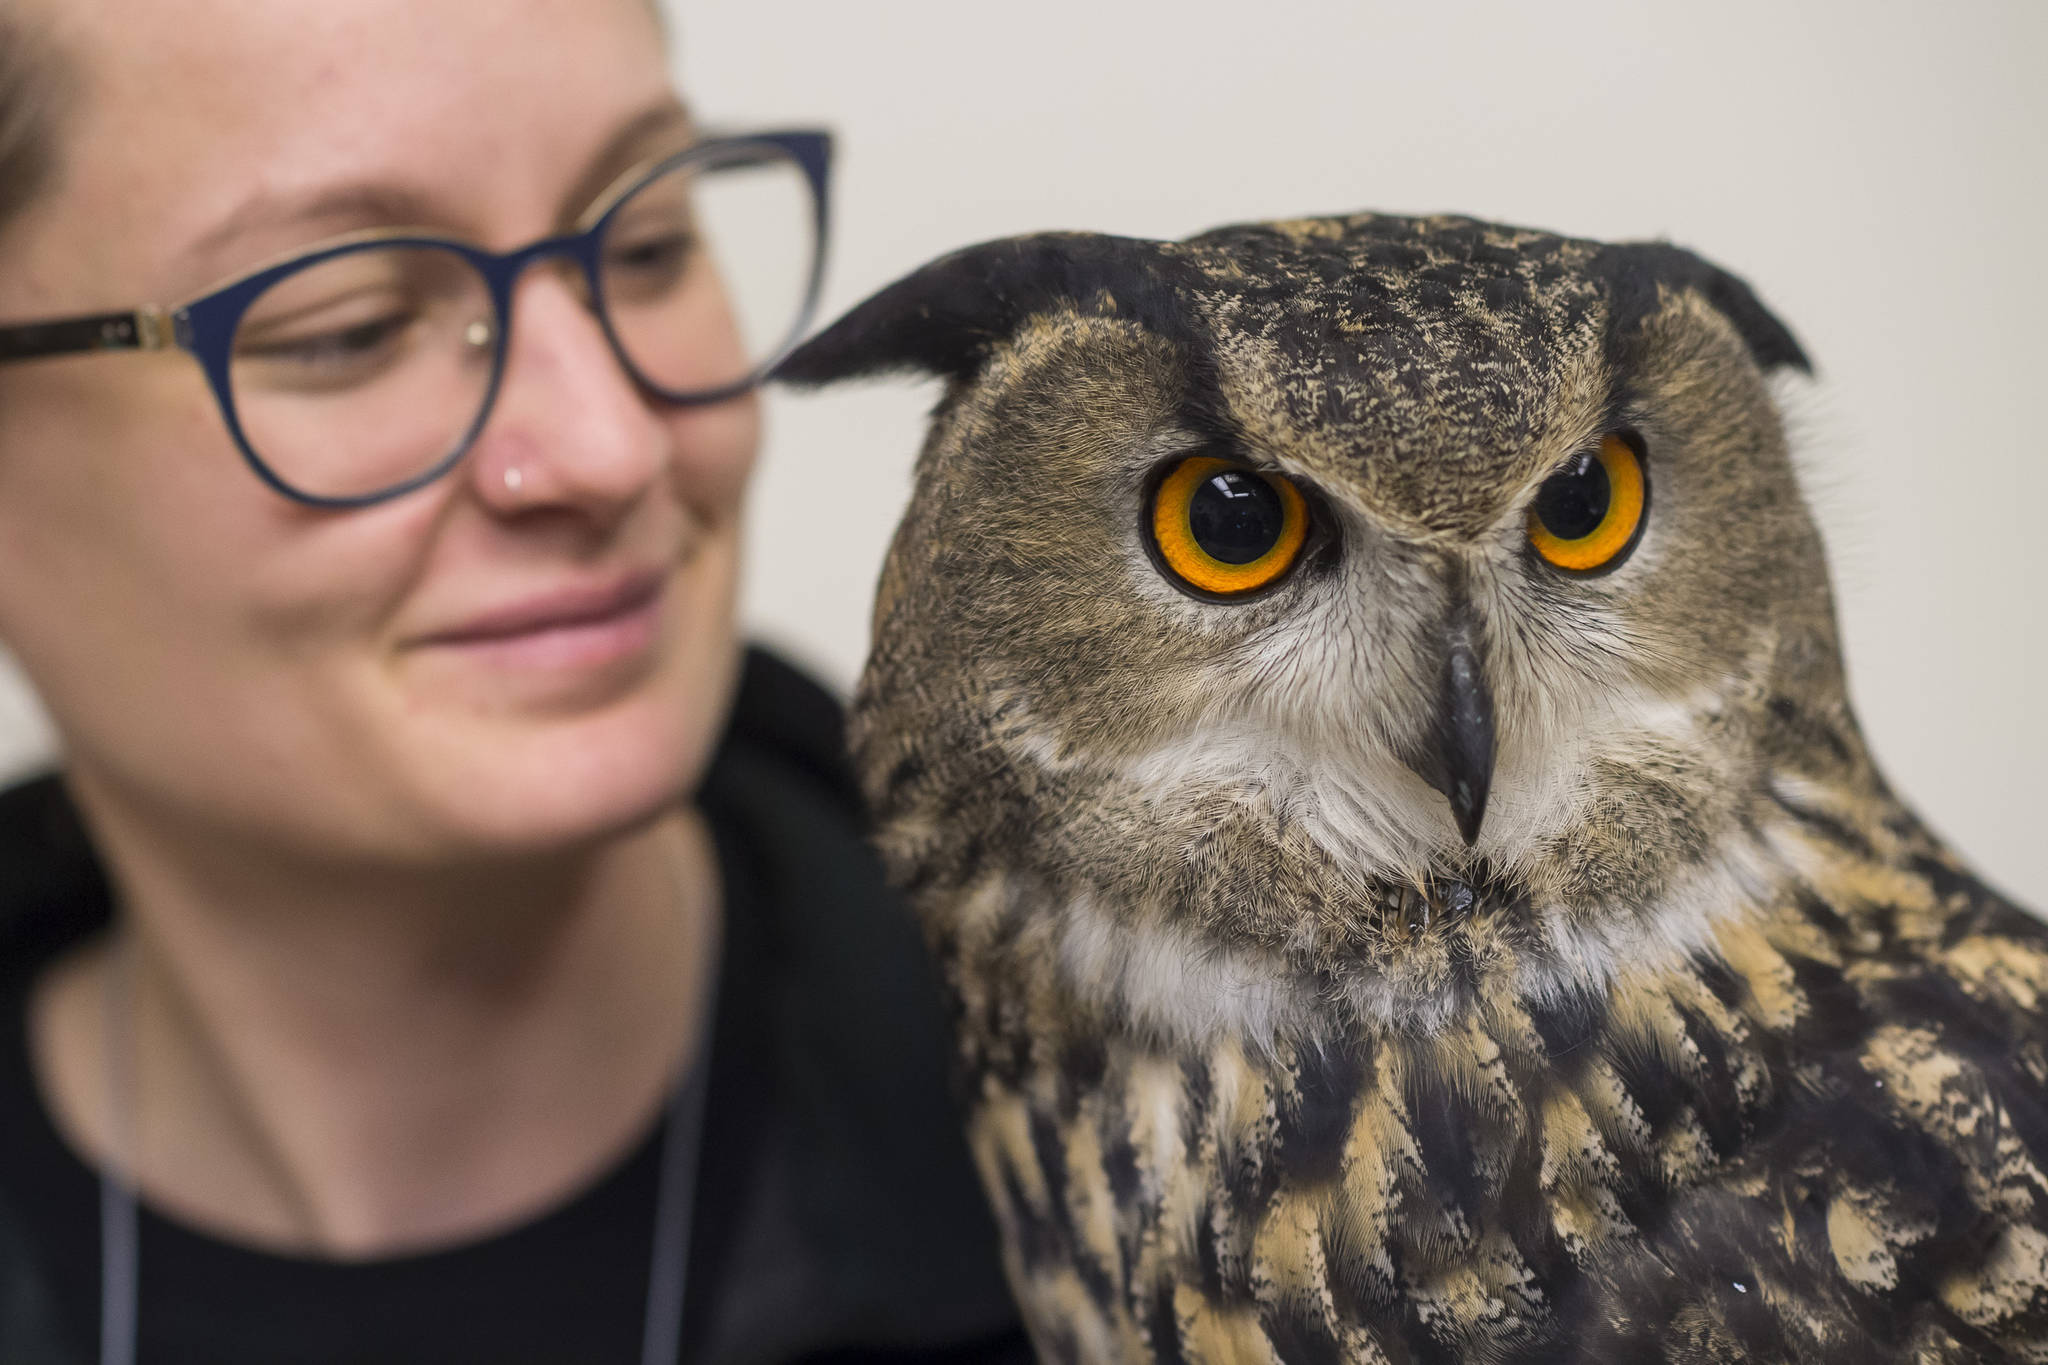 Sidney Campbell holds a Eurasian eagle-owl named “Hans” from the American Bald Eagle Foundation of Haines at the Public Market in Centennial Hall on Friday, Nov. 23, 2018. (Michael Penn | Juneau Empire)